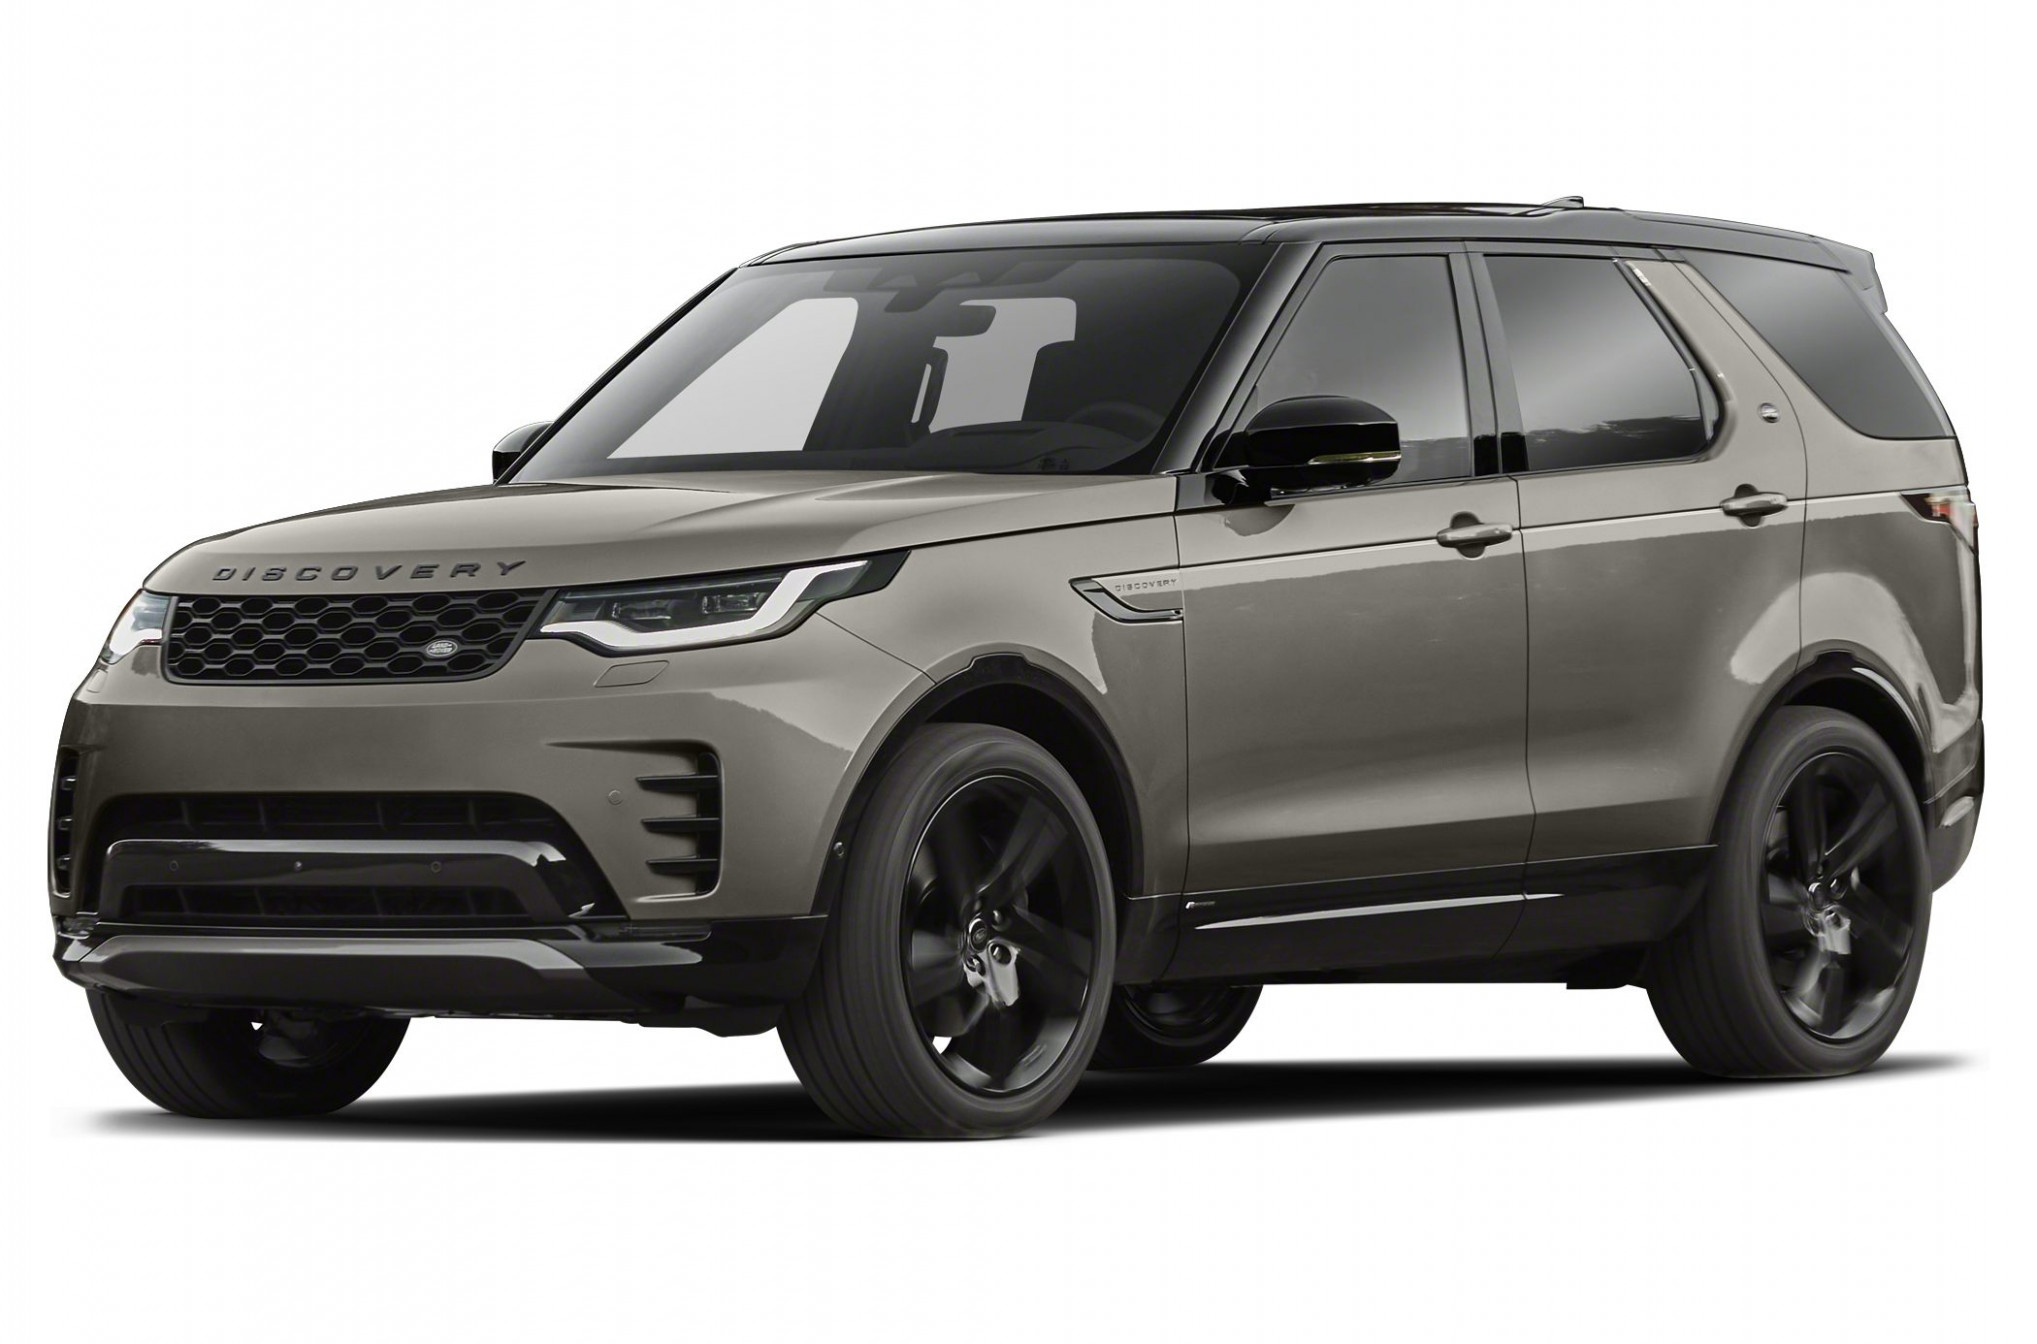 5 Land Rover Discovery Reviews, Specs, Photos - land rover discovery specs